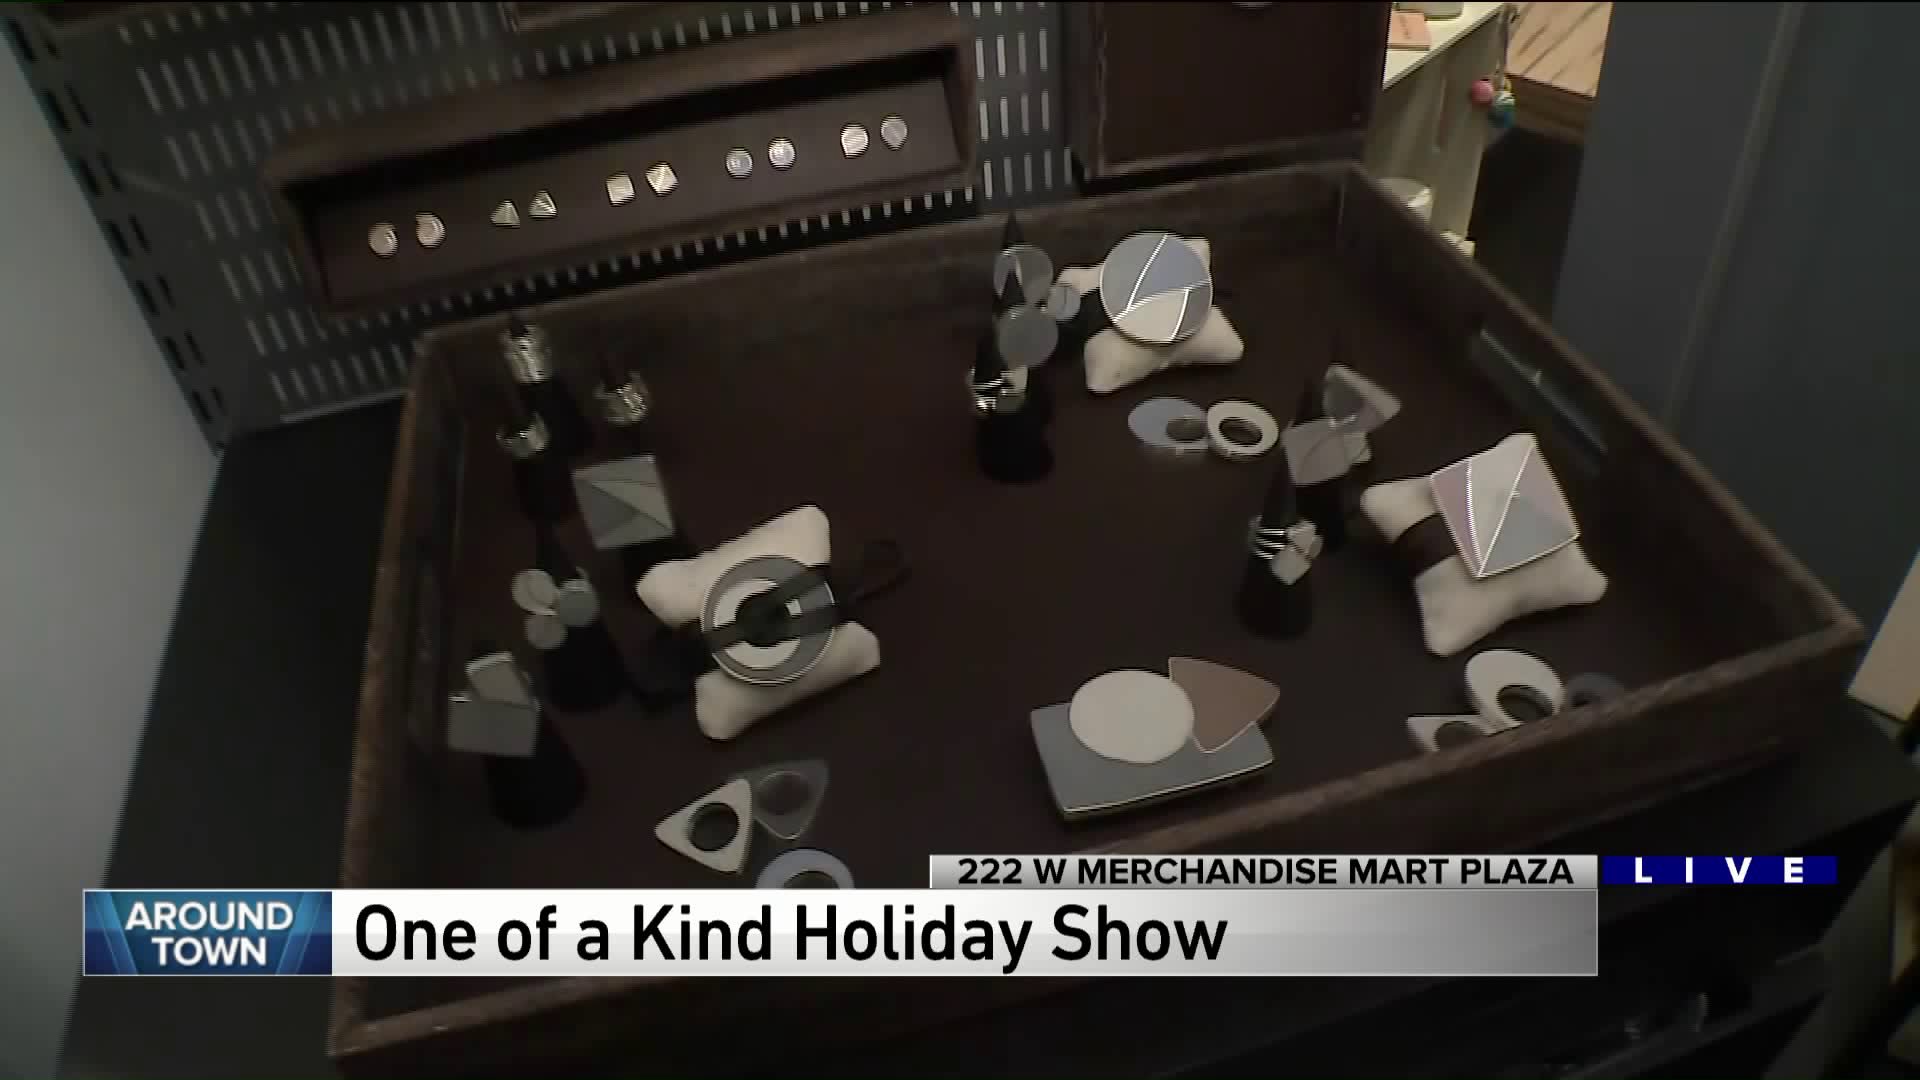 Around Town previews the One of a Kind Show at the Merchandise Mart